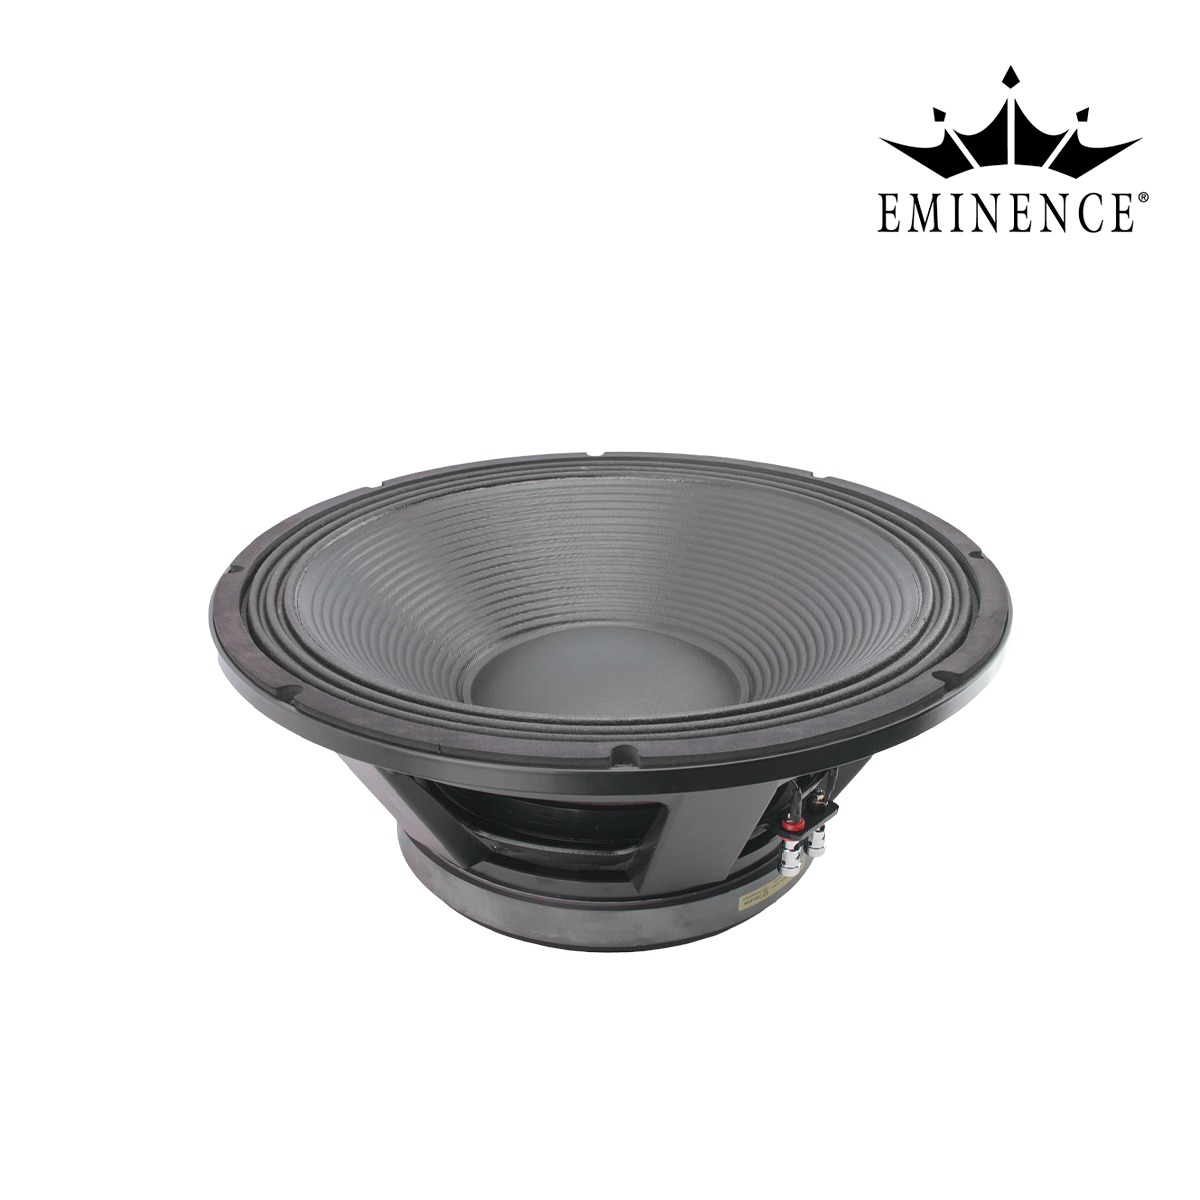 WOOFER 18IN EMINENCE 18GS3200 ALUMINIO VC 5IN